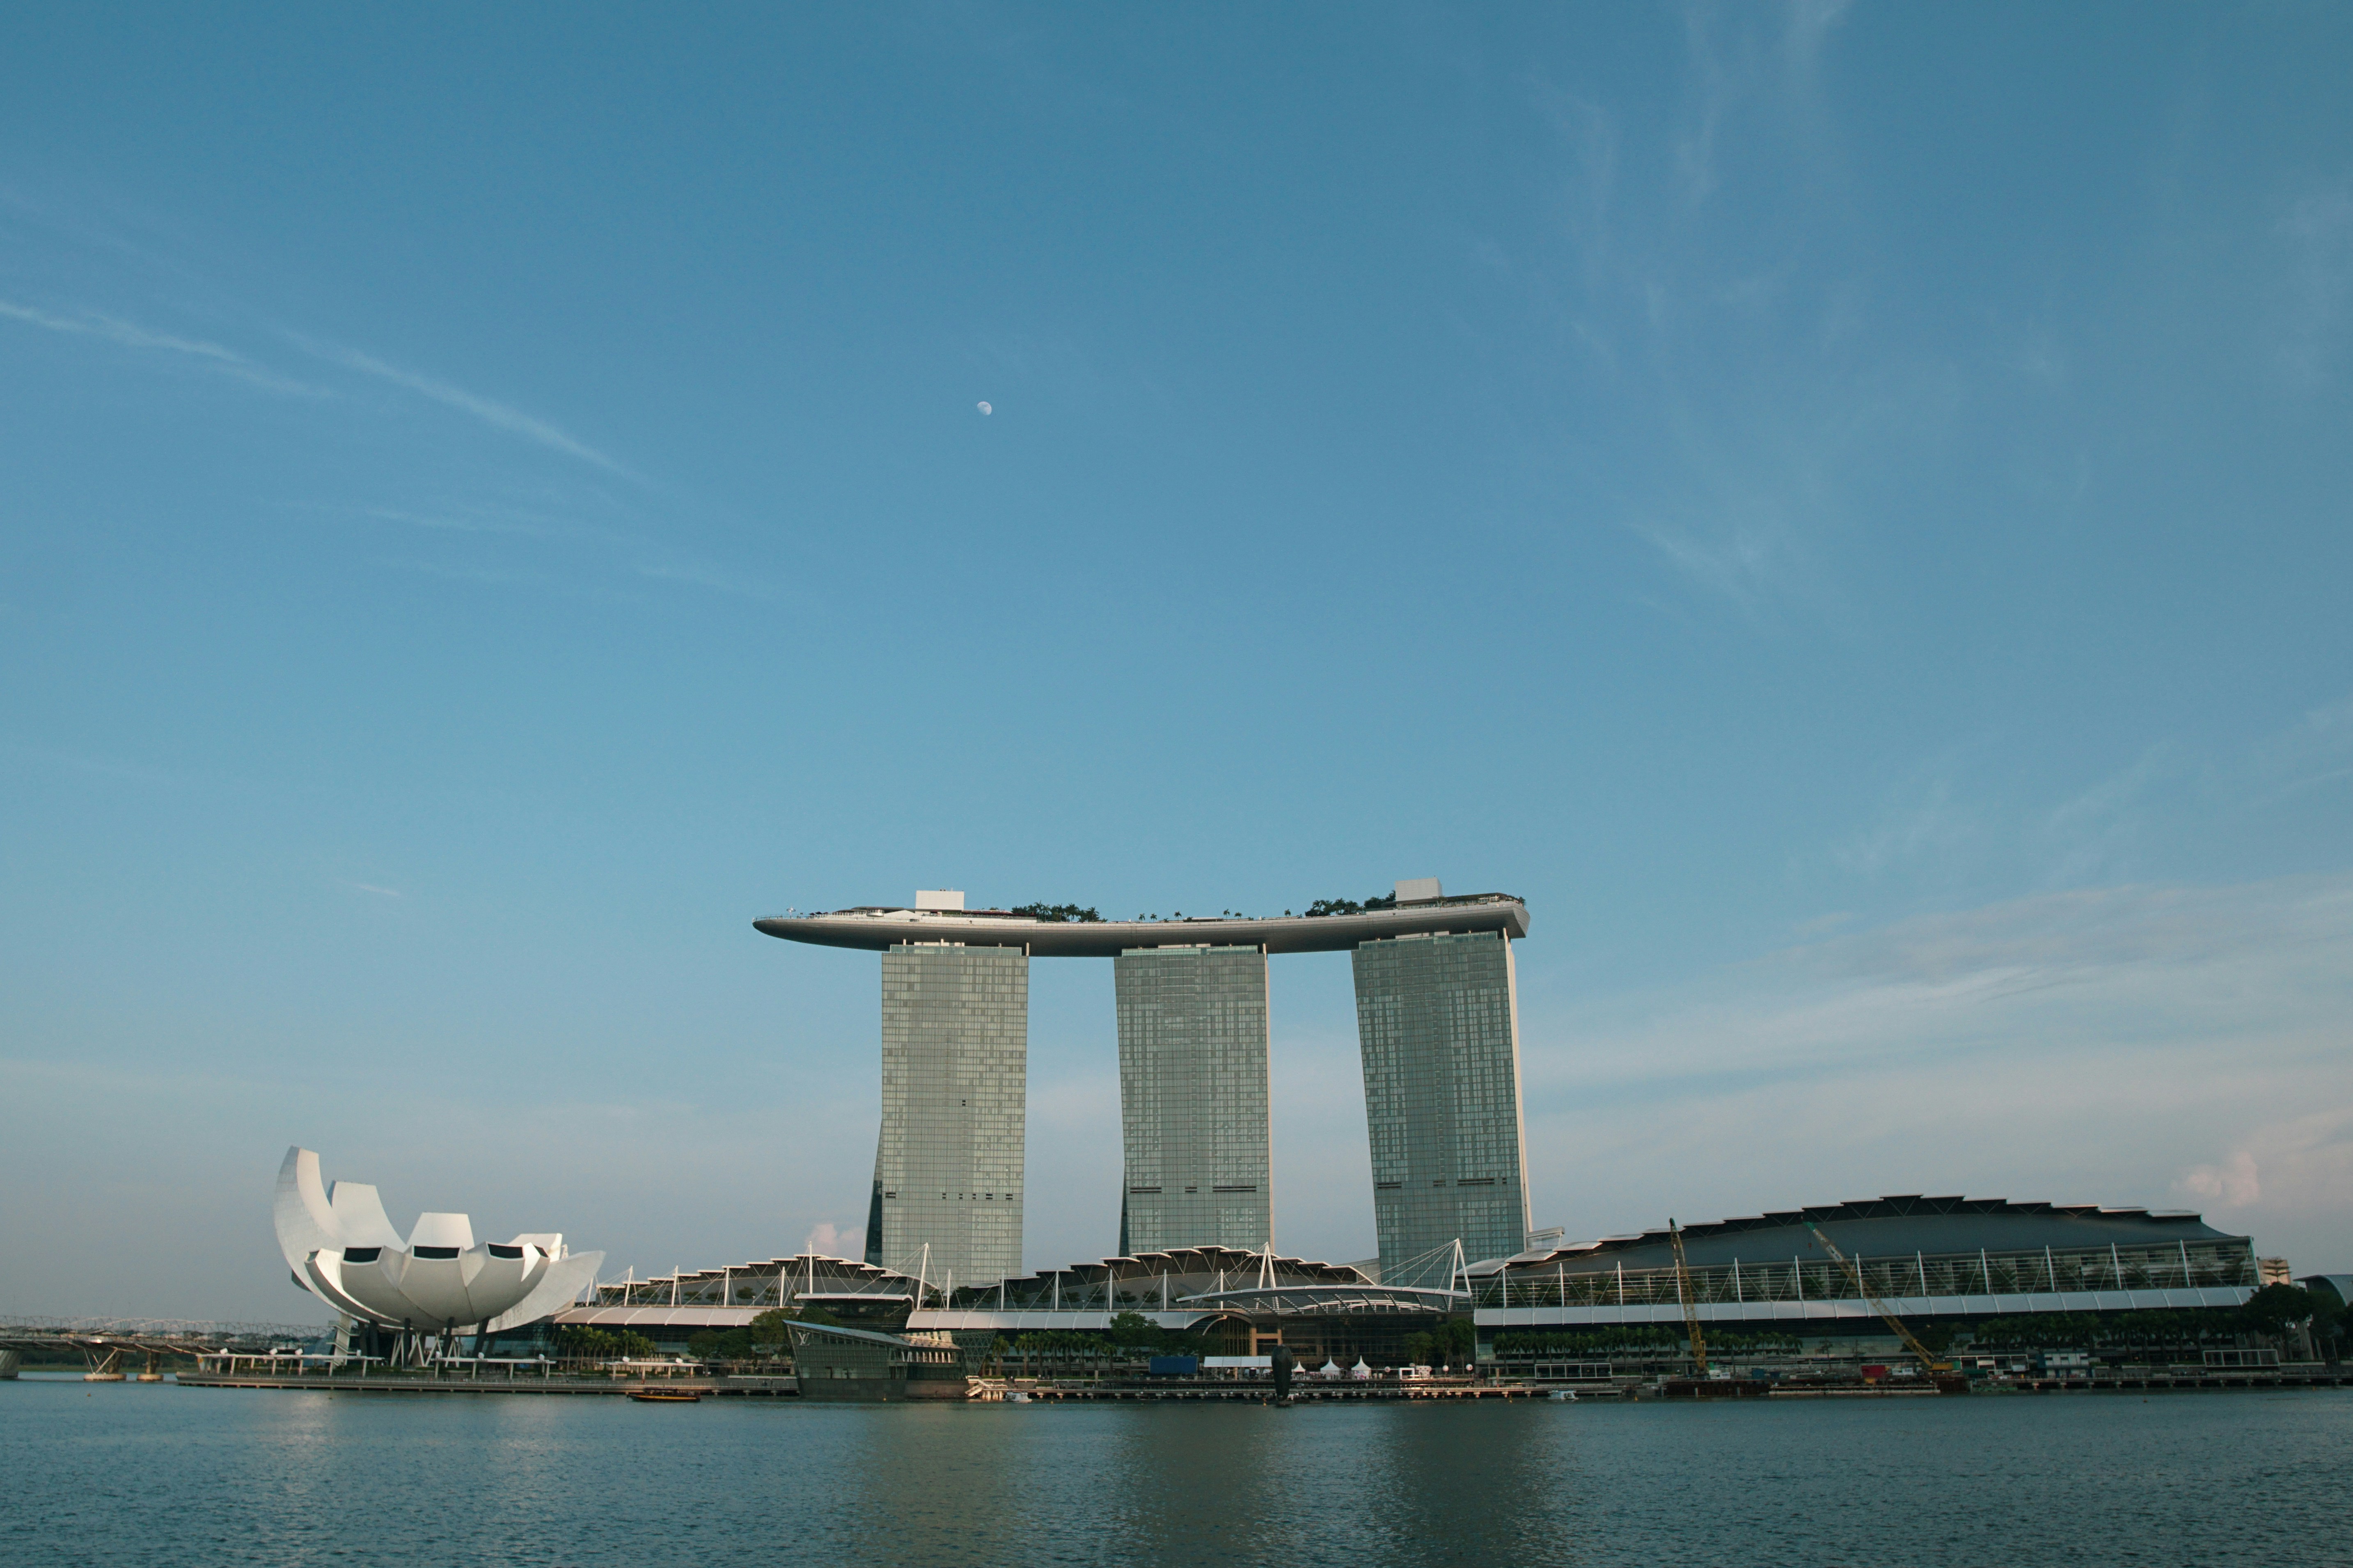 Looking over the Marina Bay Sands, Singapore’s most iconic hotel with the world’s largest rooftop infinity pool.